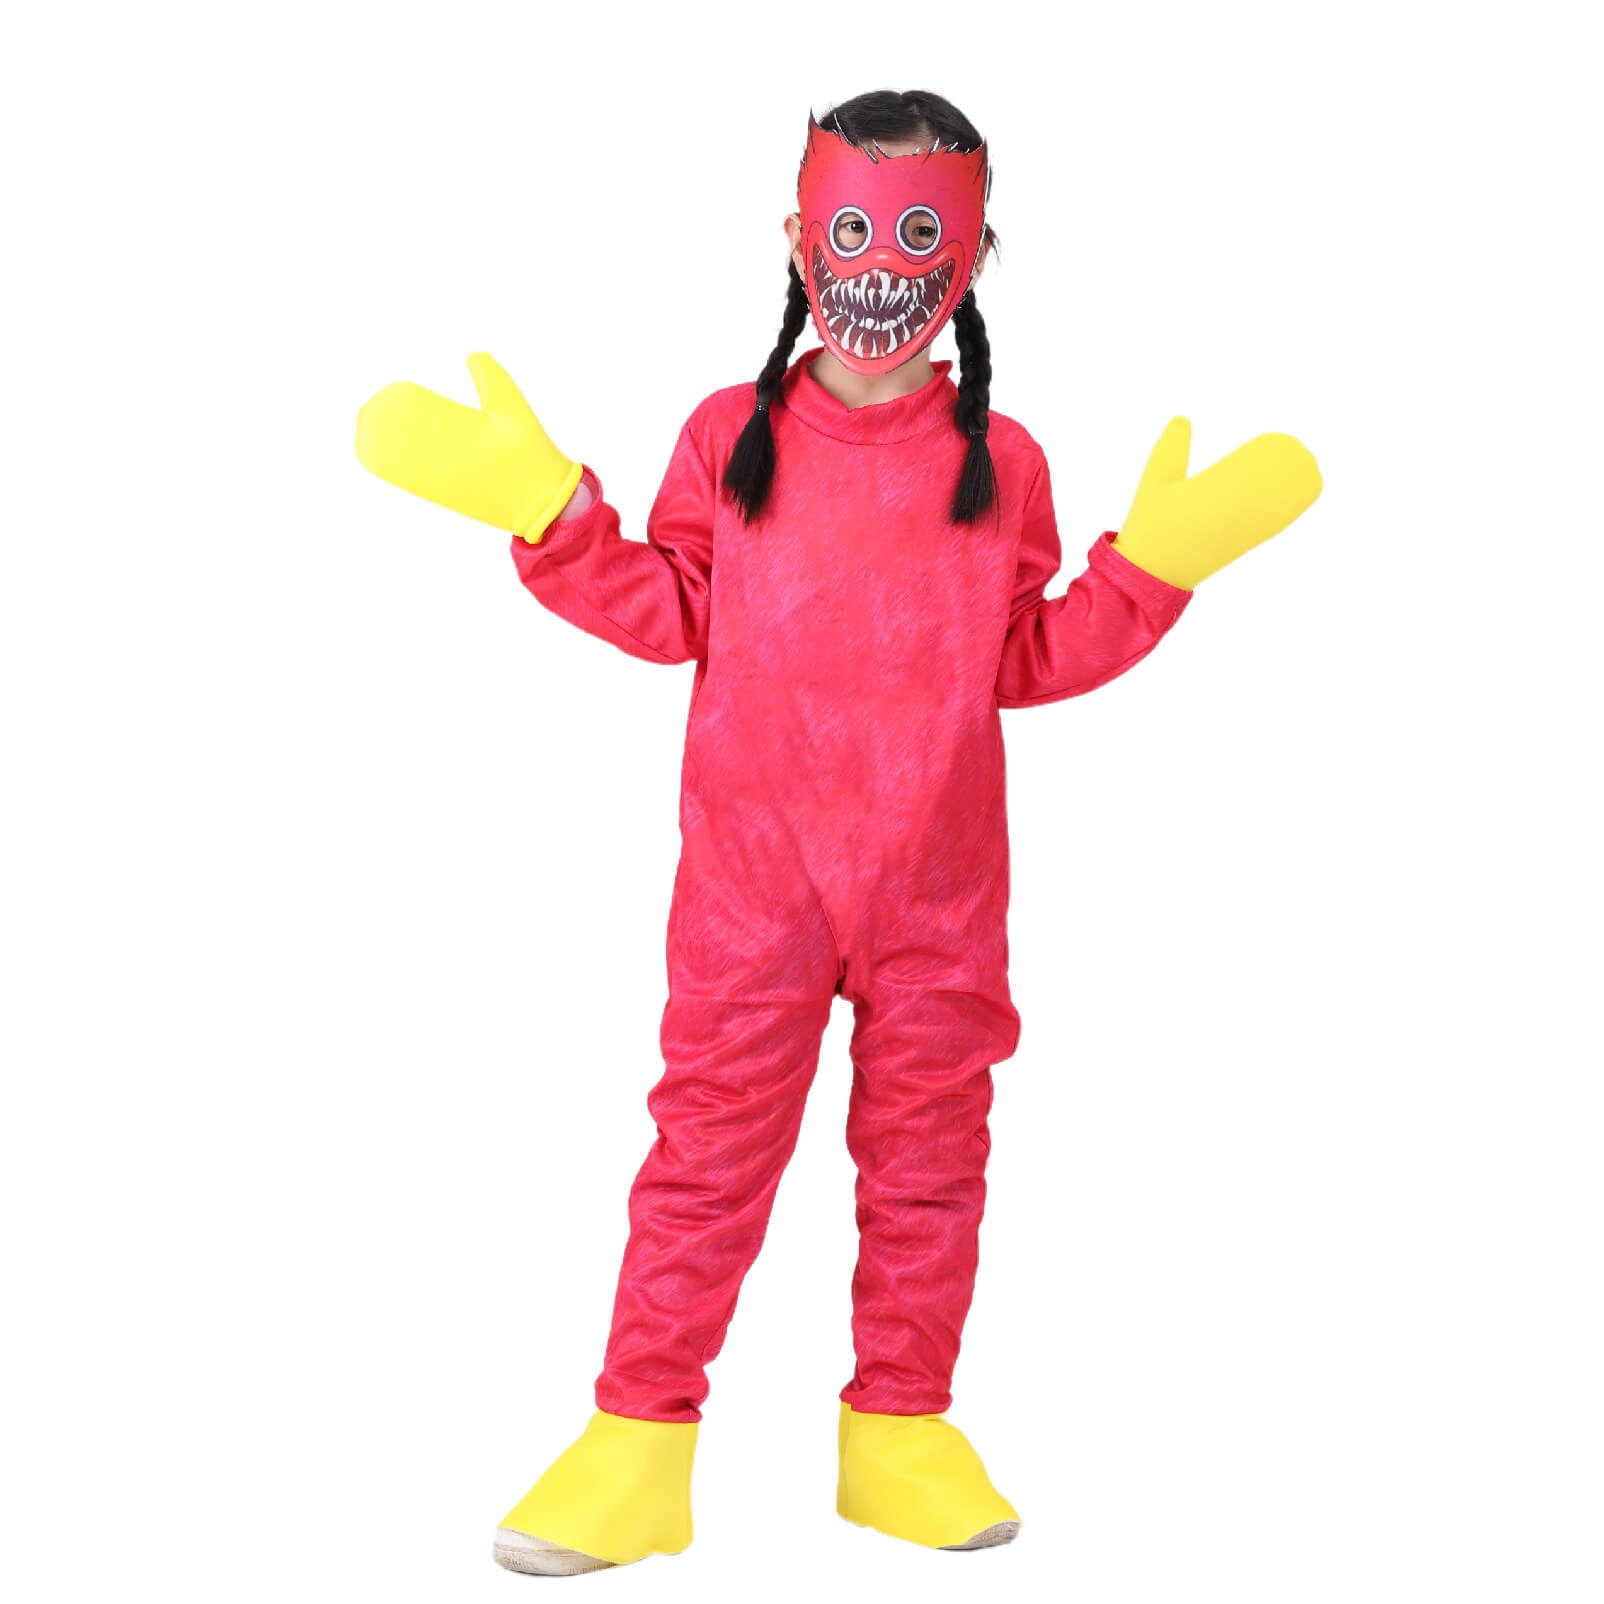 Kids Hagi Wagi Costume Kissy Missy and Hugggie Wuggie Outfits Horror Game Cosplay Jumpsuit with Mask and Gloves Full Set